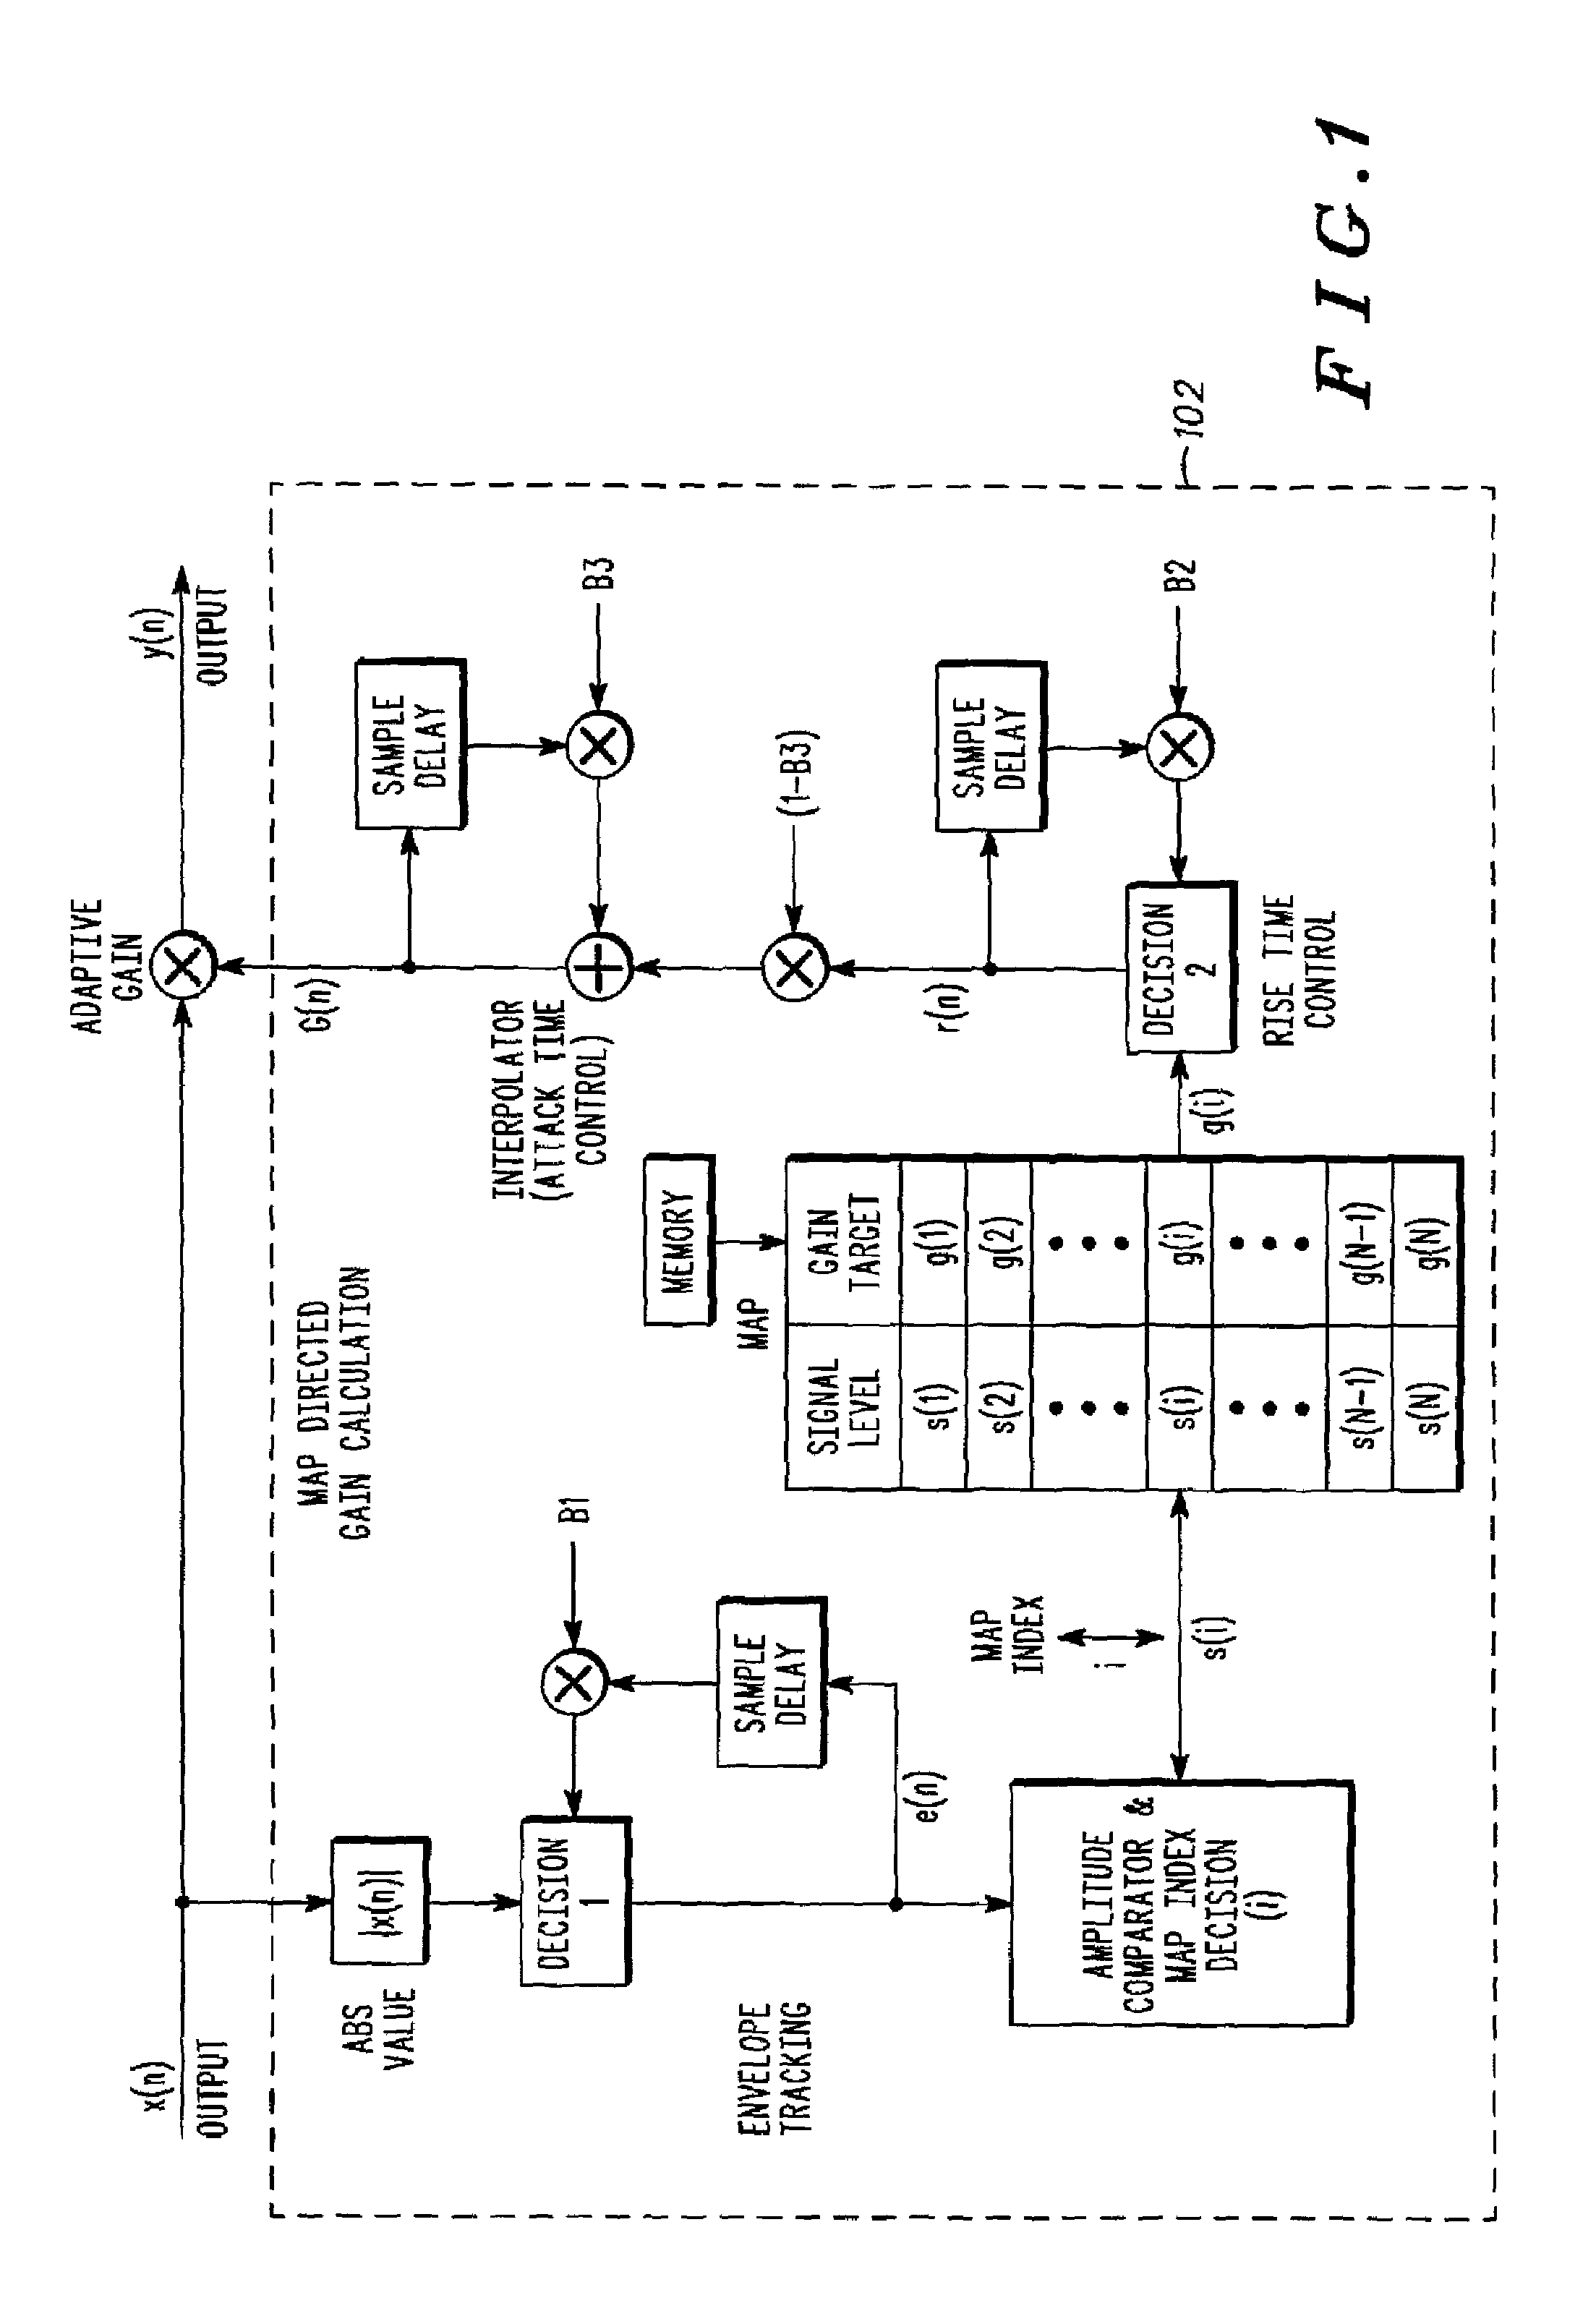 Dynamic gain control of audio in a communication device